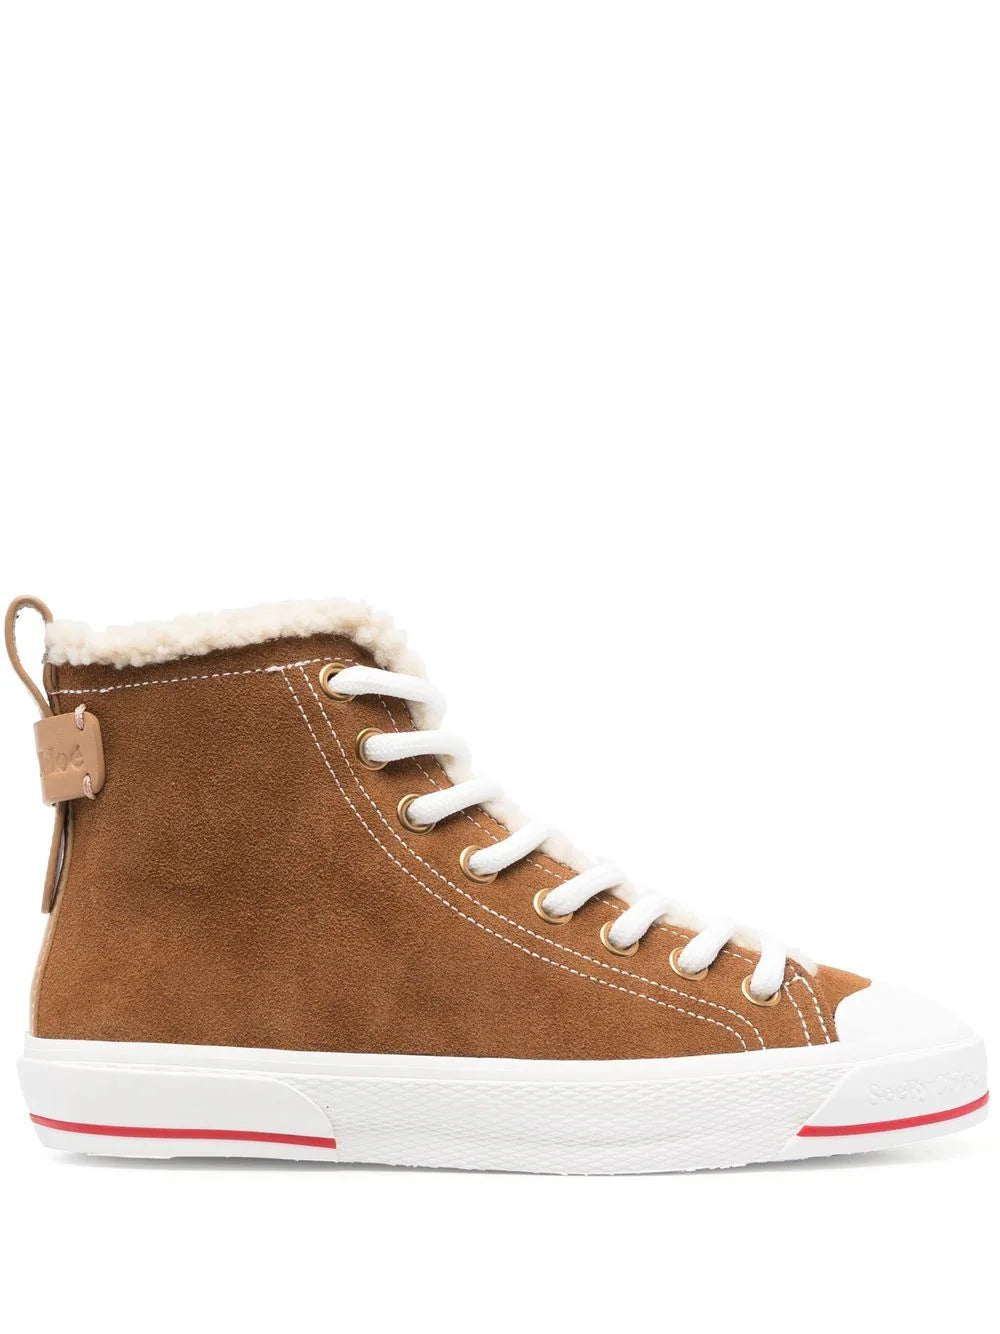 High-top Shearling Lined Sneakers